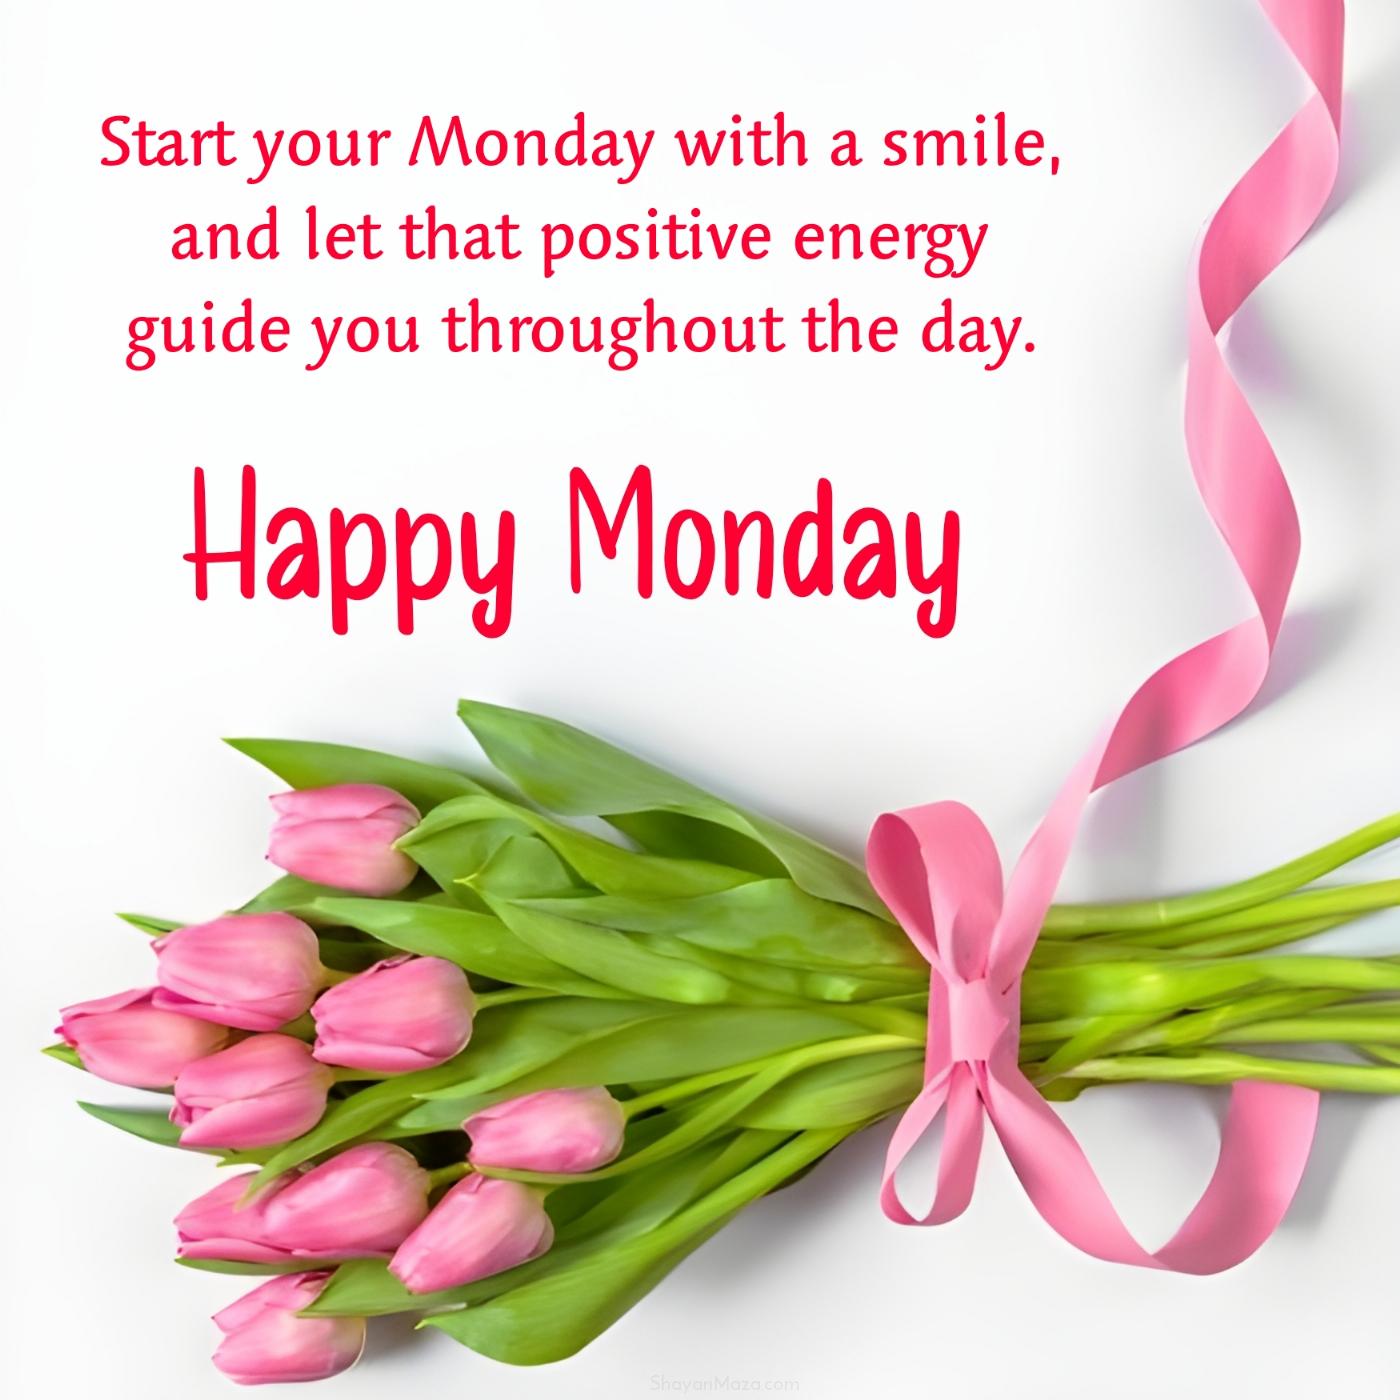 Start your Monday with a smile and let that positive energy